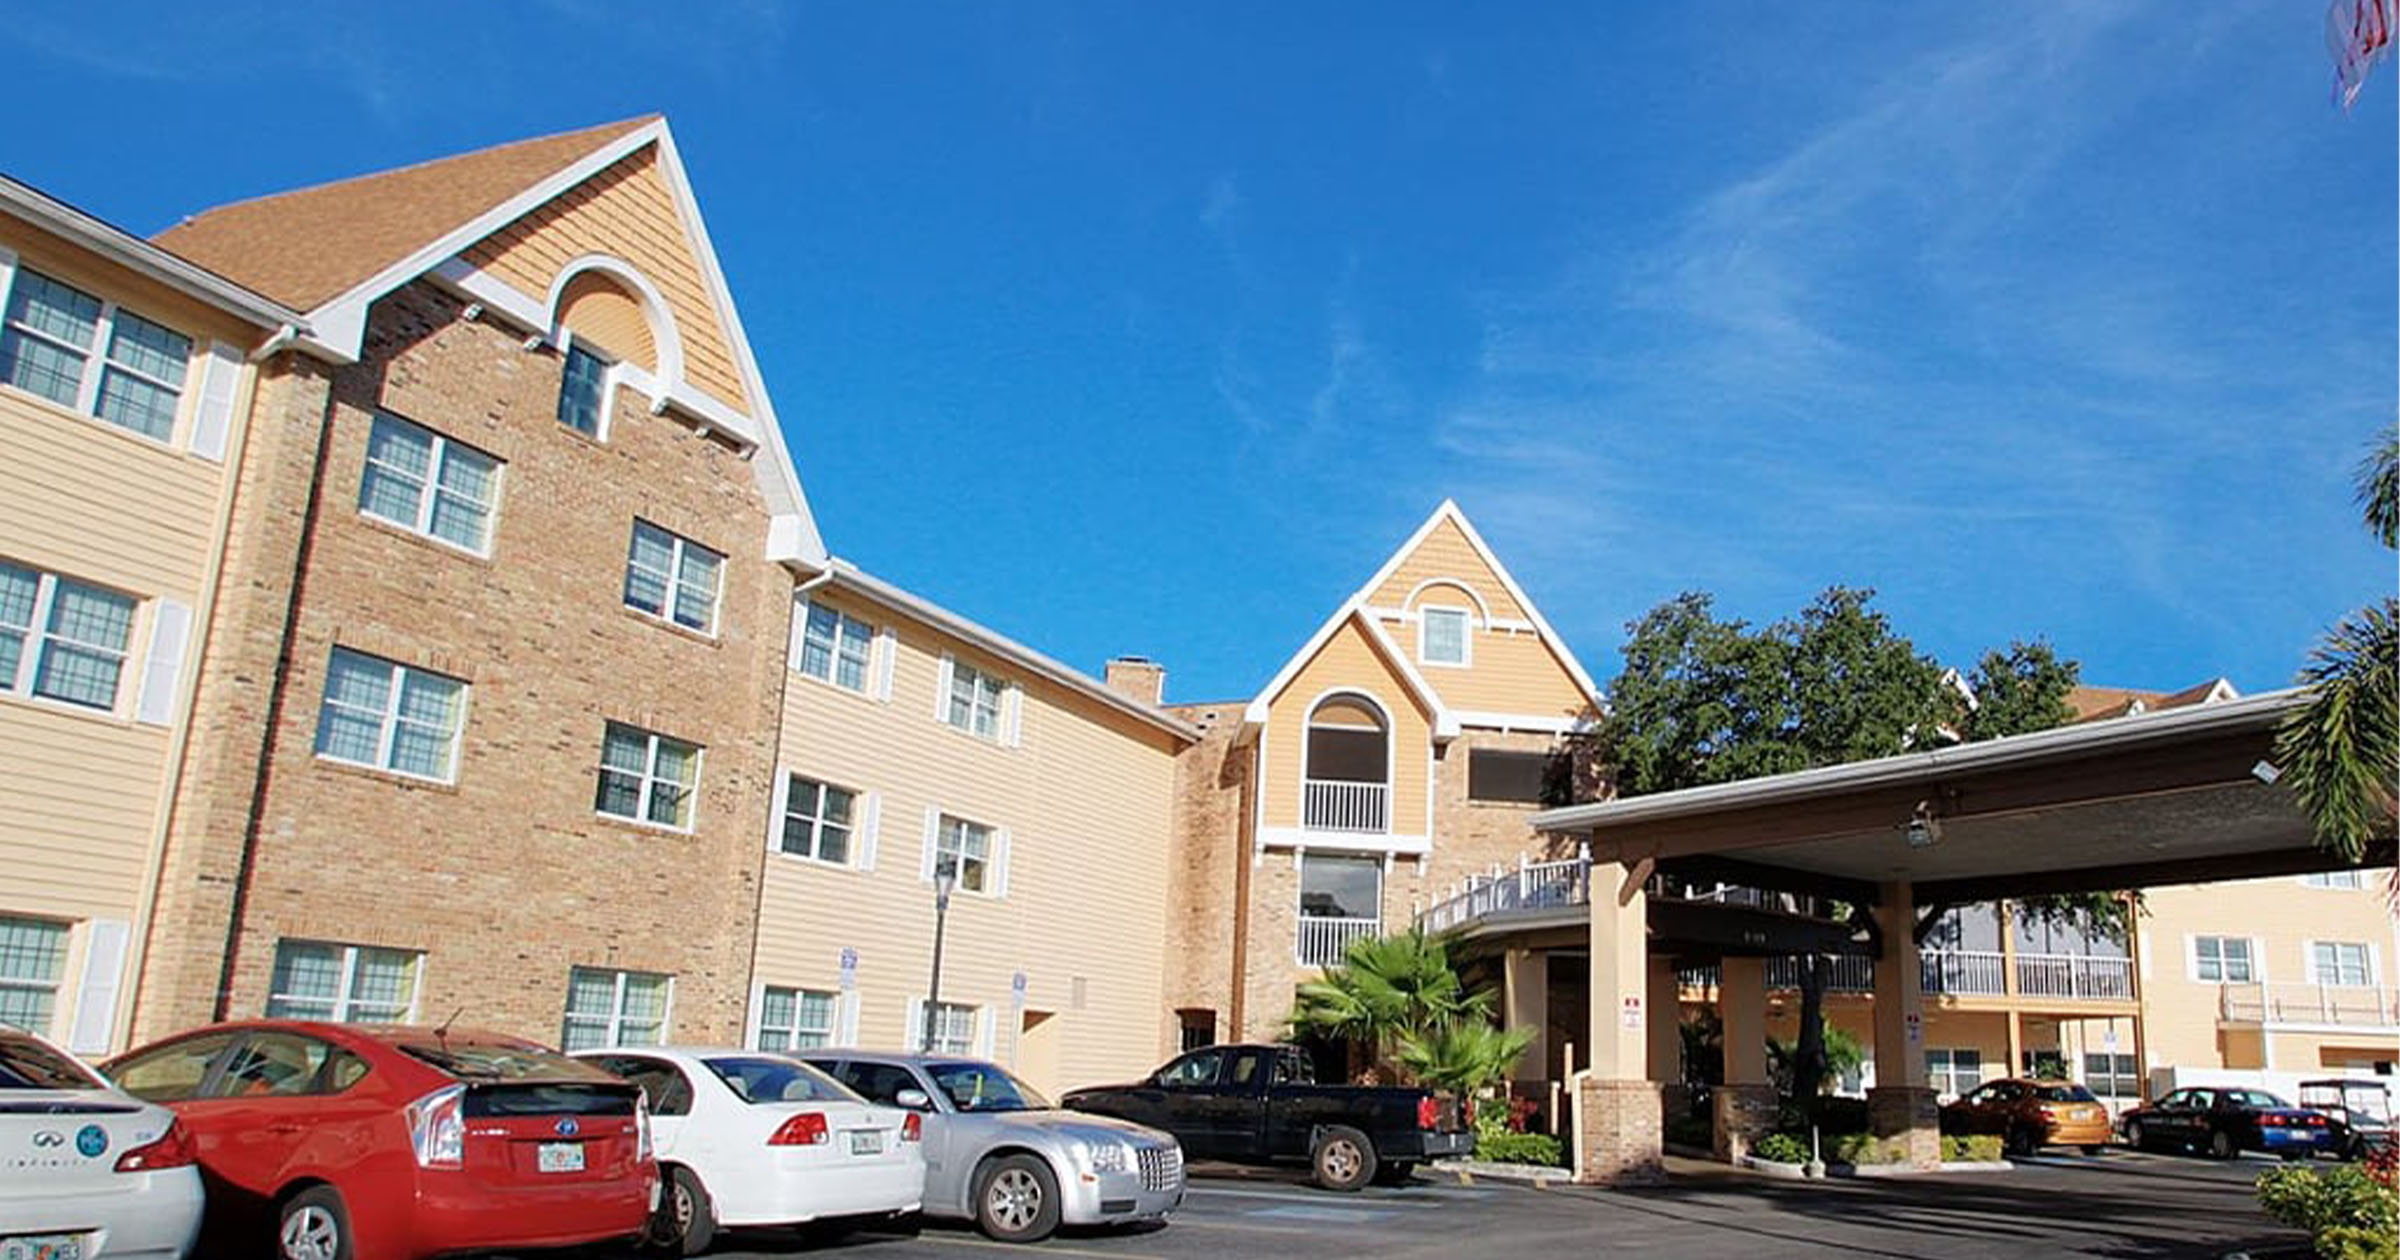 Bayside Terrace Senior Living - My Care Finders